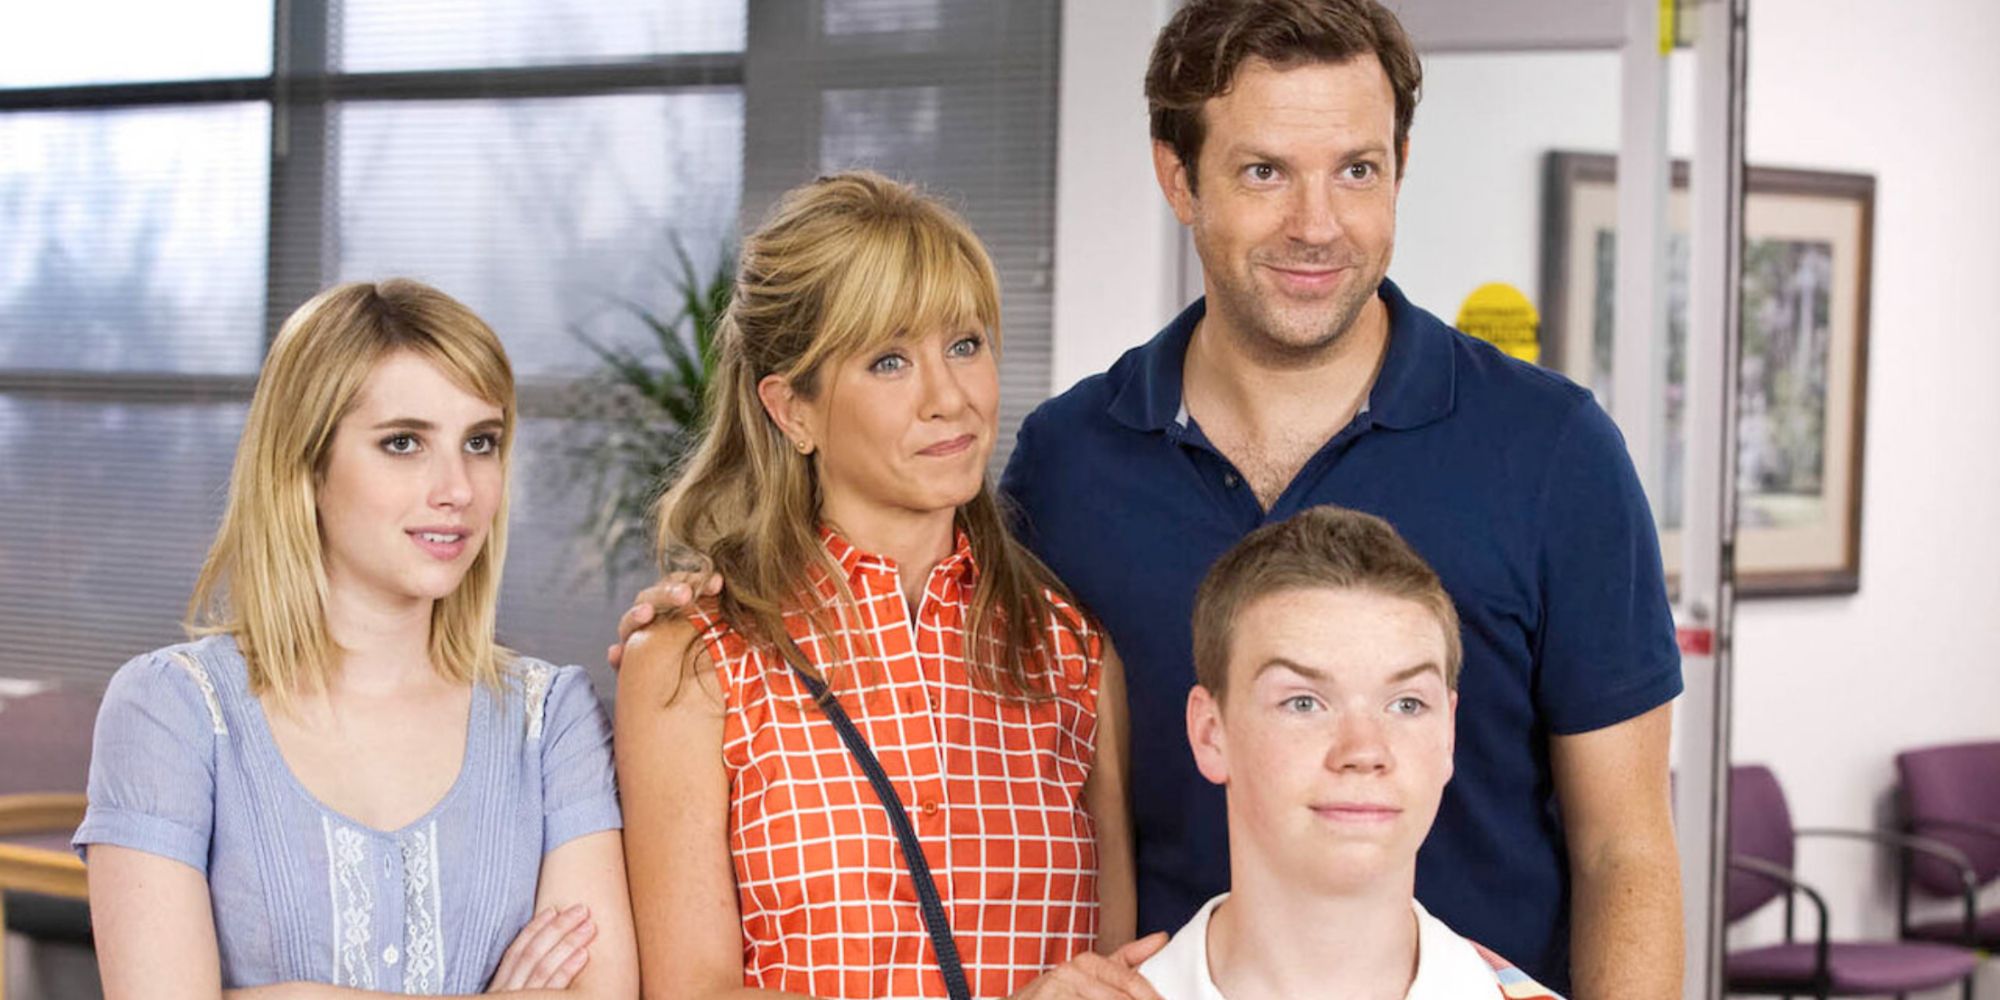 Emma Roberts, Jennifer Aniston, Will Poulter and Jason Sudeikis smiling together as a family